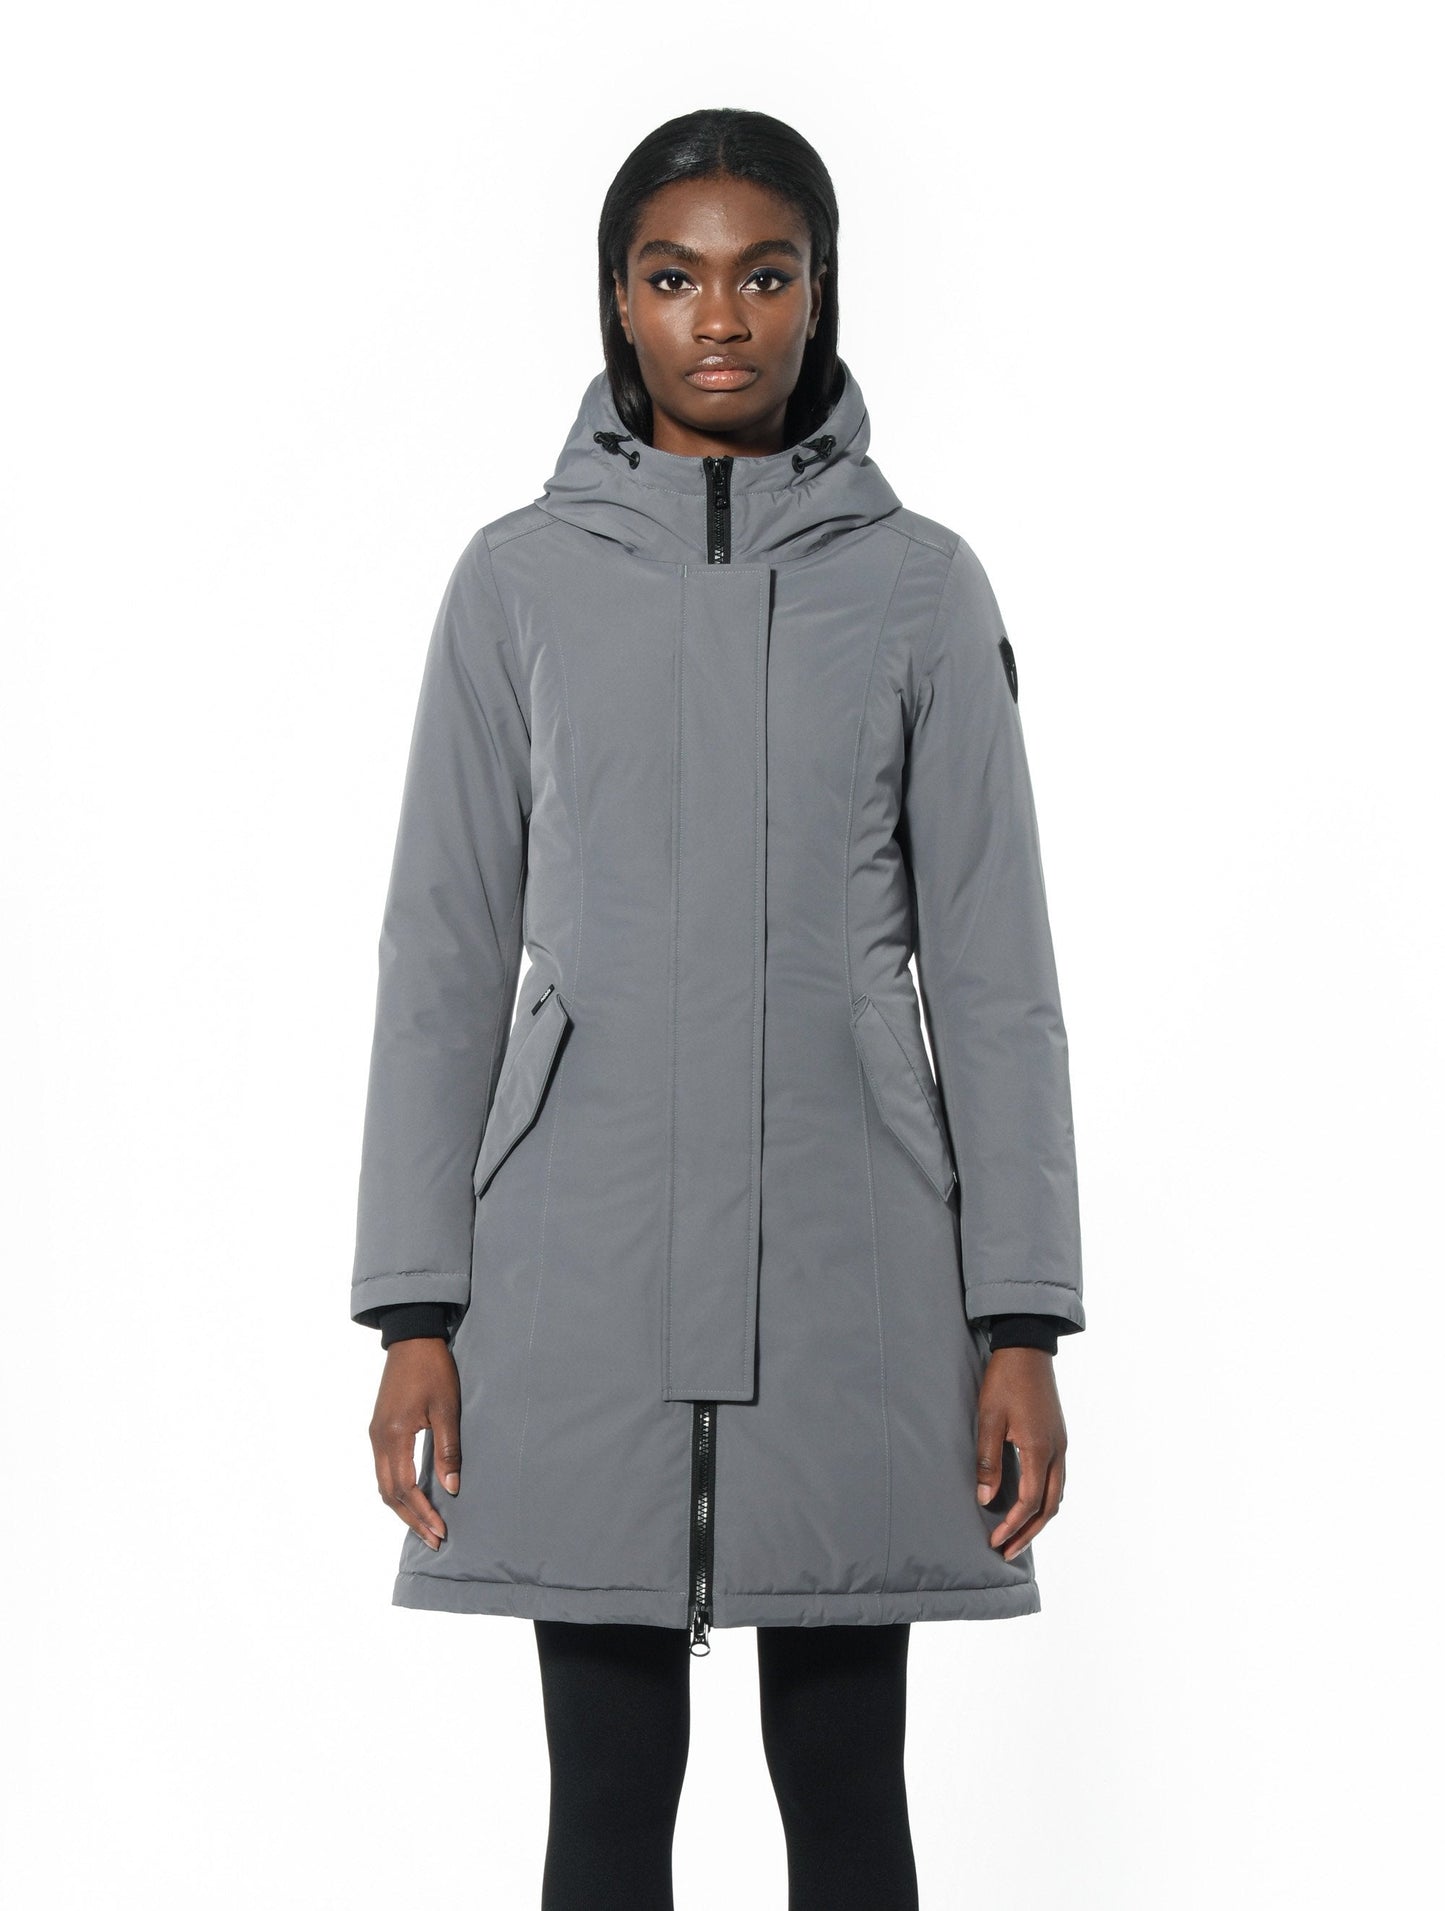 Ladies thigh length down-filled parka with non-removable hood in Concrete